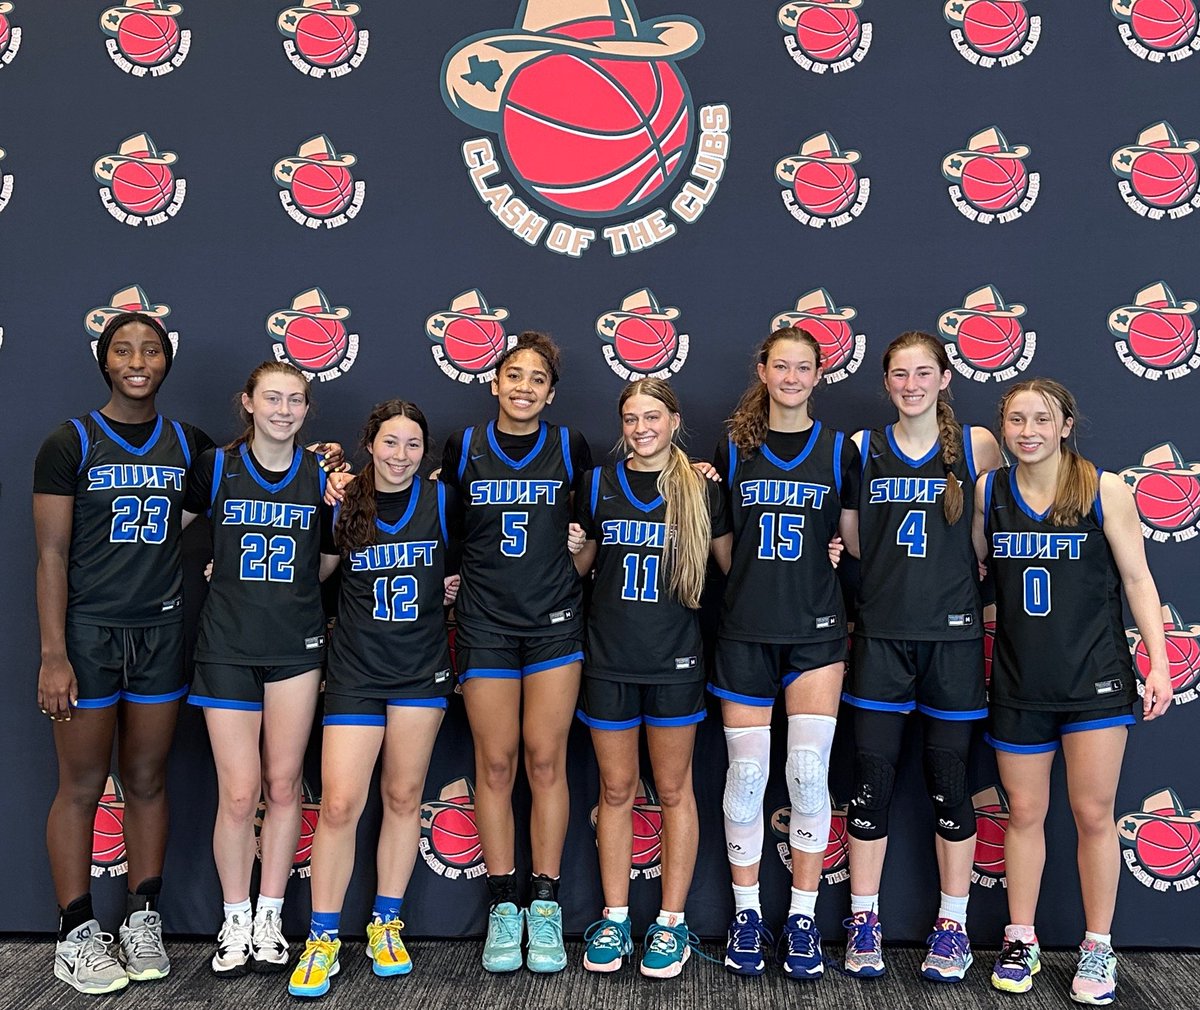 My ✌🏼squads handled business this weekend, finishing 6-2 📈📈 17U Mathurin 4-1 Gold Bracket 🏆 (loss to @PurePrepHoops - Platinum champs) 16U Mathurin 4-1 Gold Bracket 🏆 (loss to @TTG_FREEAGENTS - Platinum champs) These girls battled in Pool A all weekend. Beyond proud of